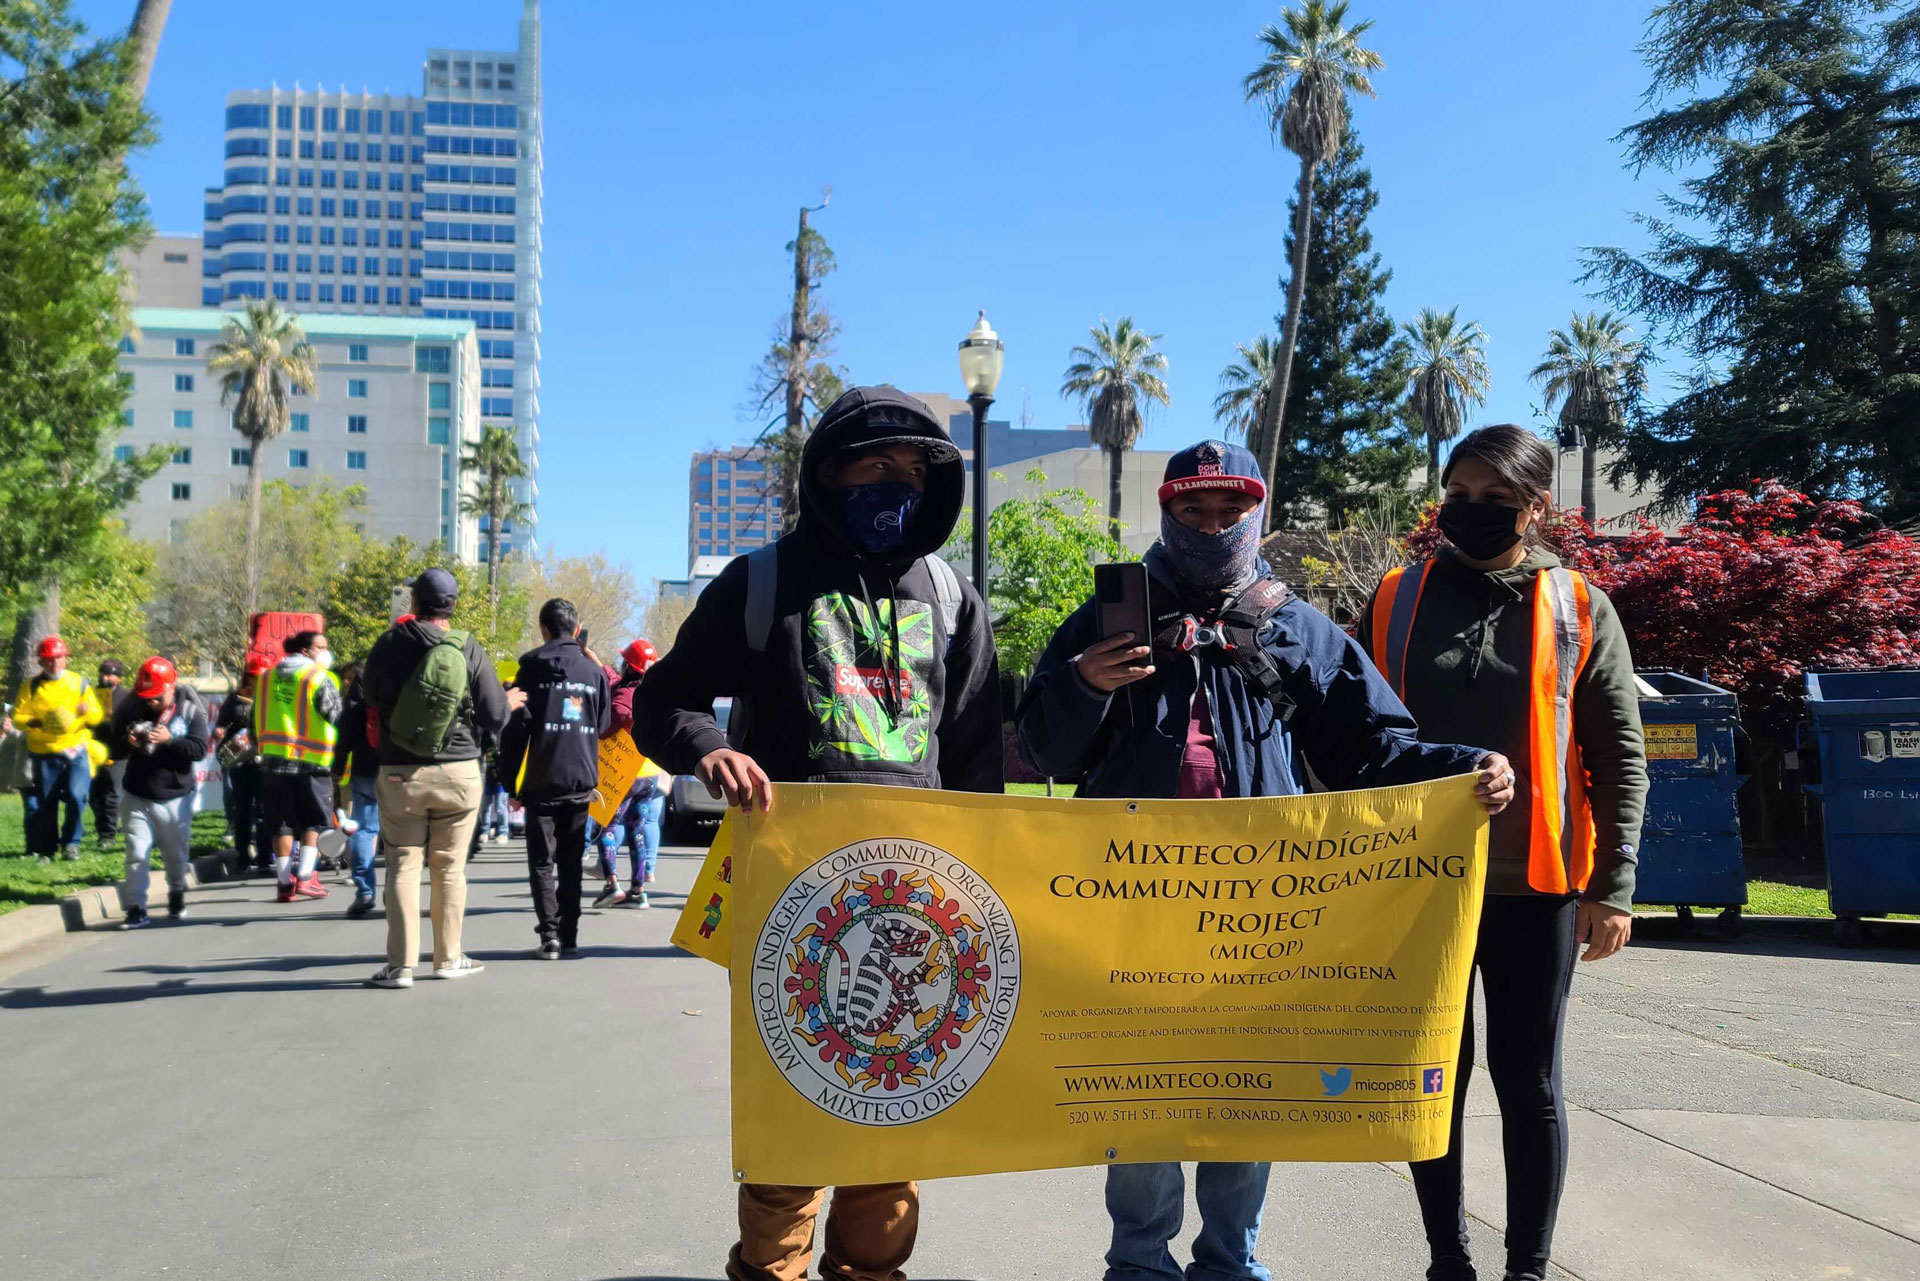 Three demonstrators, all wearing dark sweatshirts and face masks that obscure their faces, hold up a yellow sign with a bright, round insignia that says Mixteco/Indigeni Community Organizing Project, standing in the middle of a street with trees and high-rise buildings beyond them, on a blue-sky day.